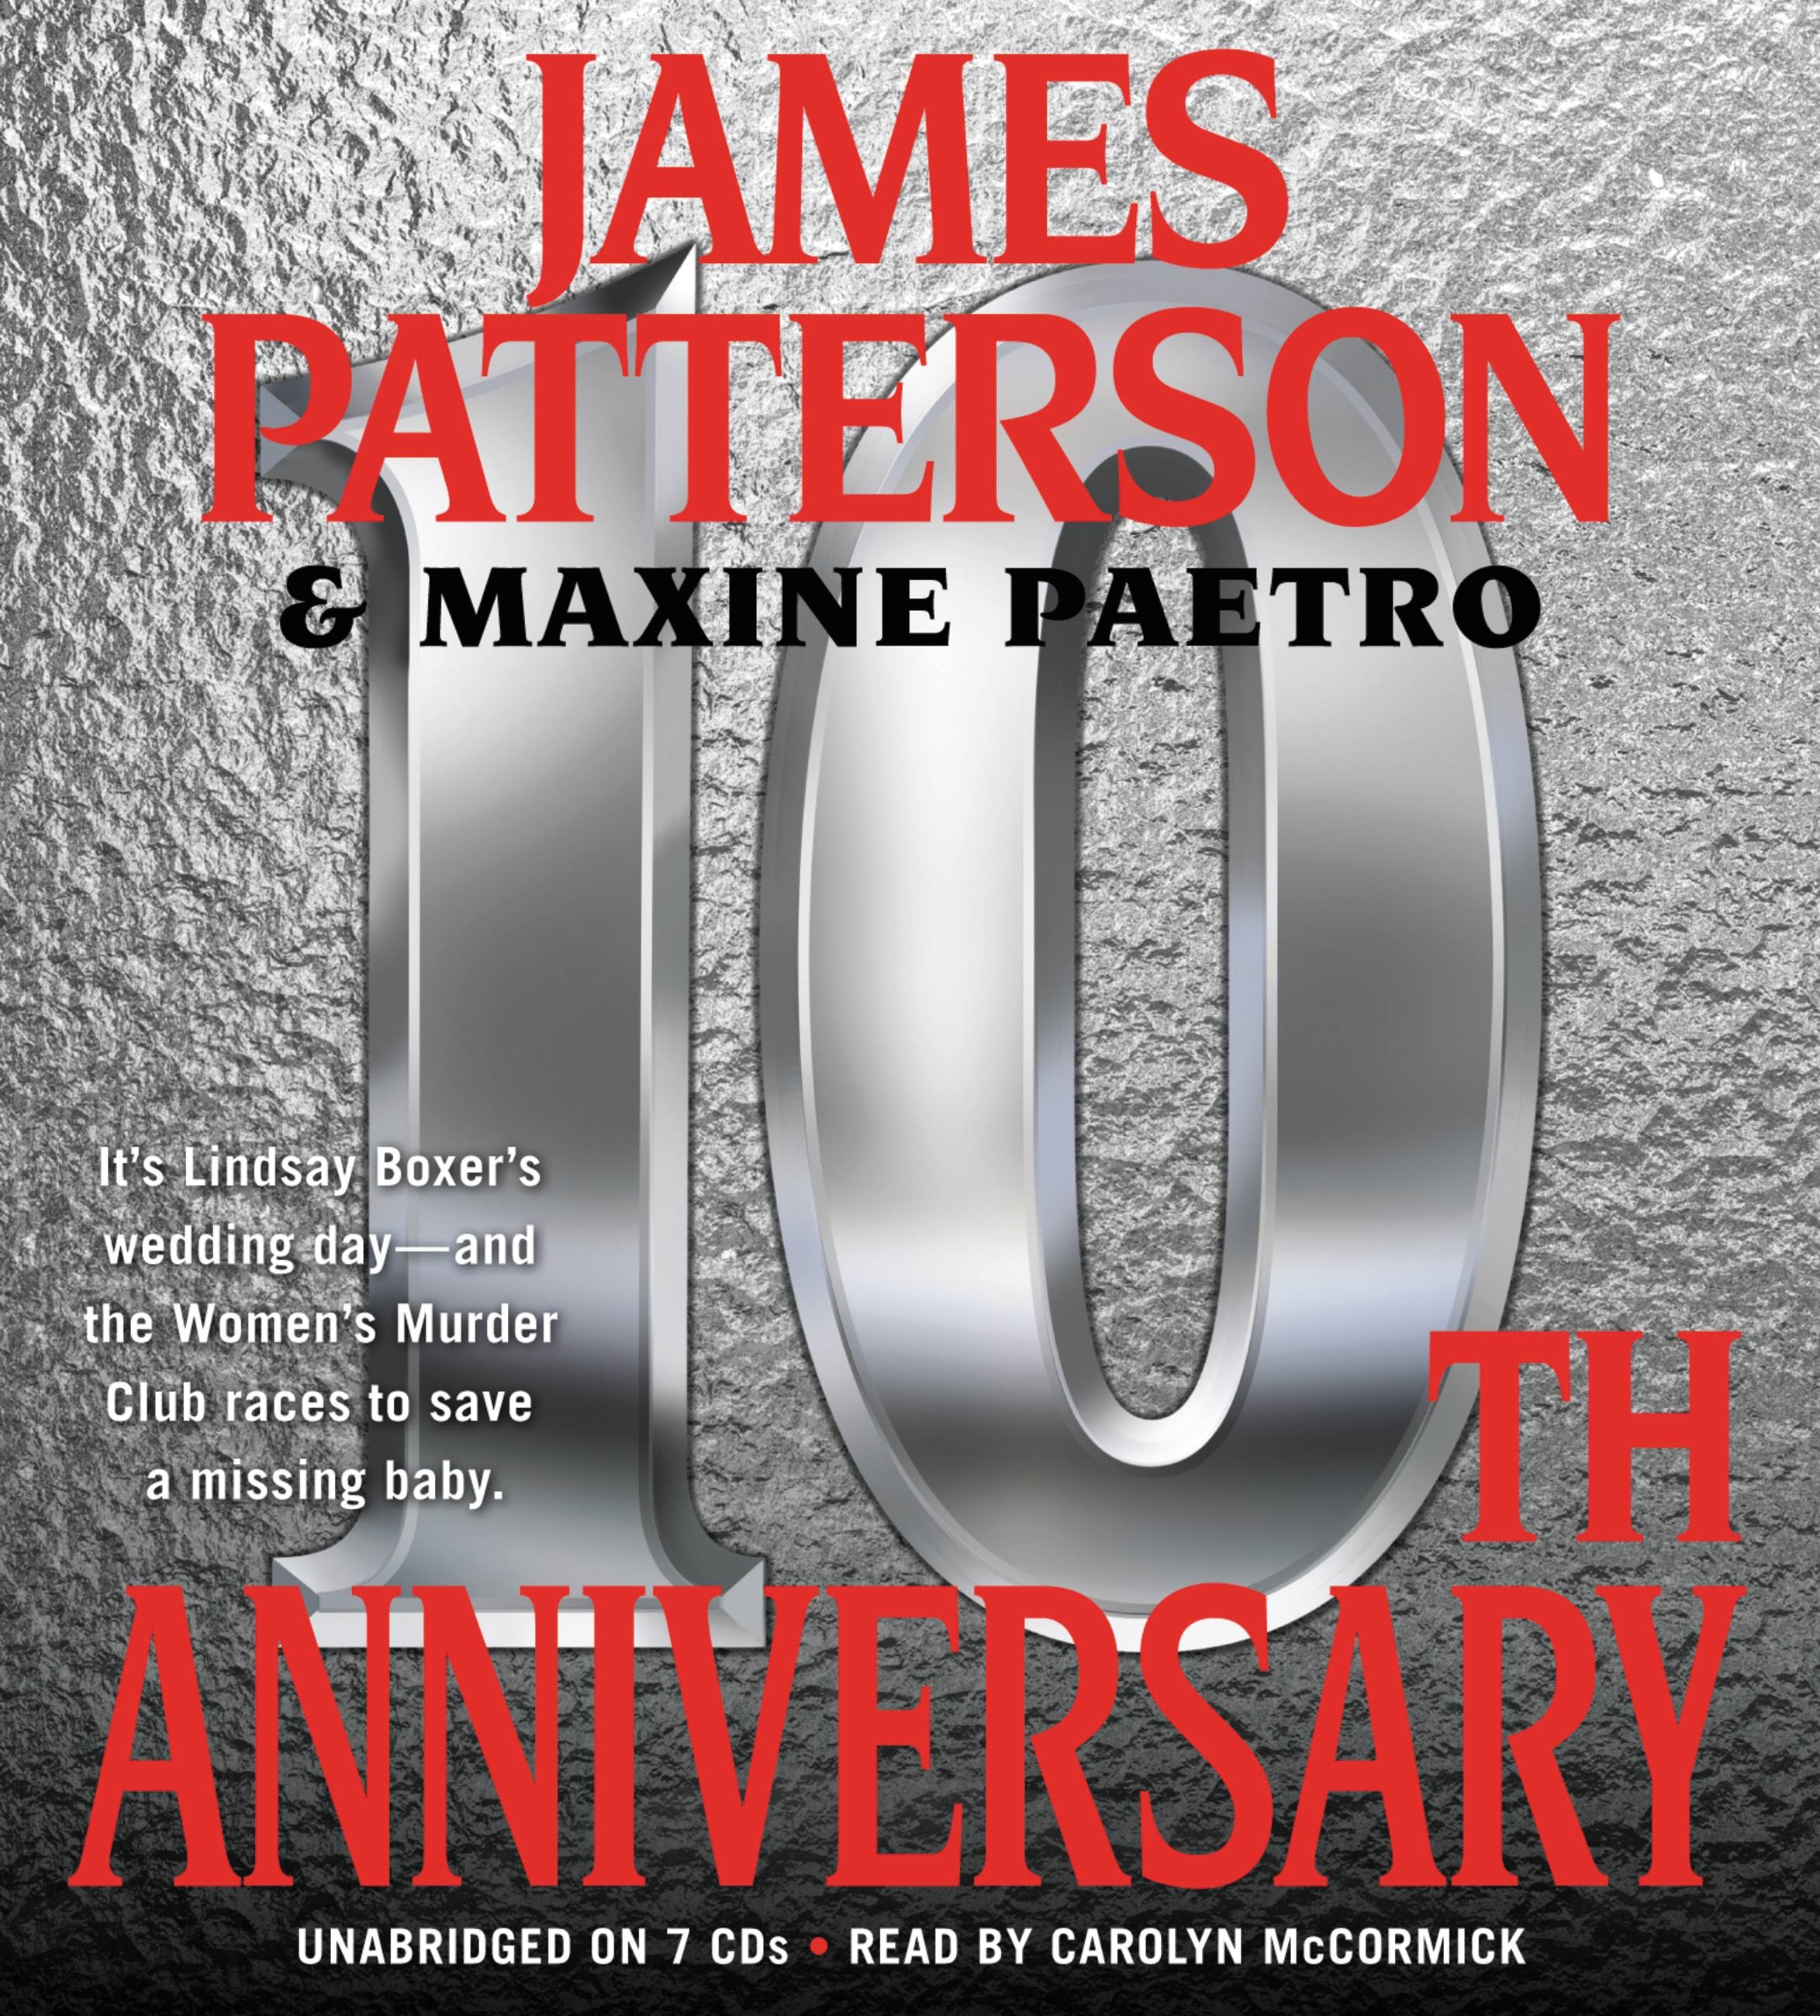 10th Anniversary by James Patterson | Hachette Book Group